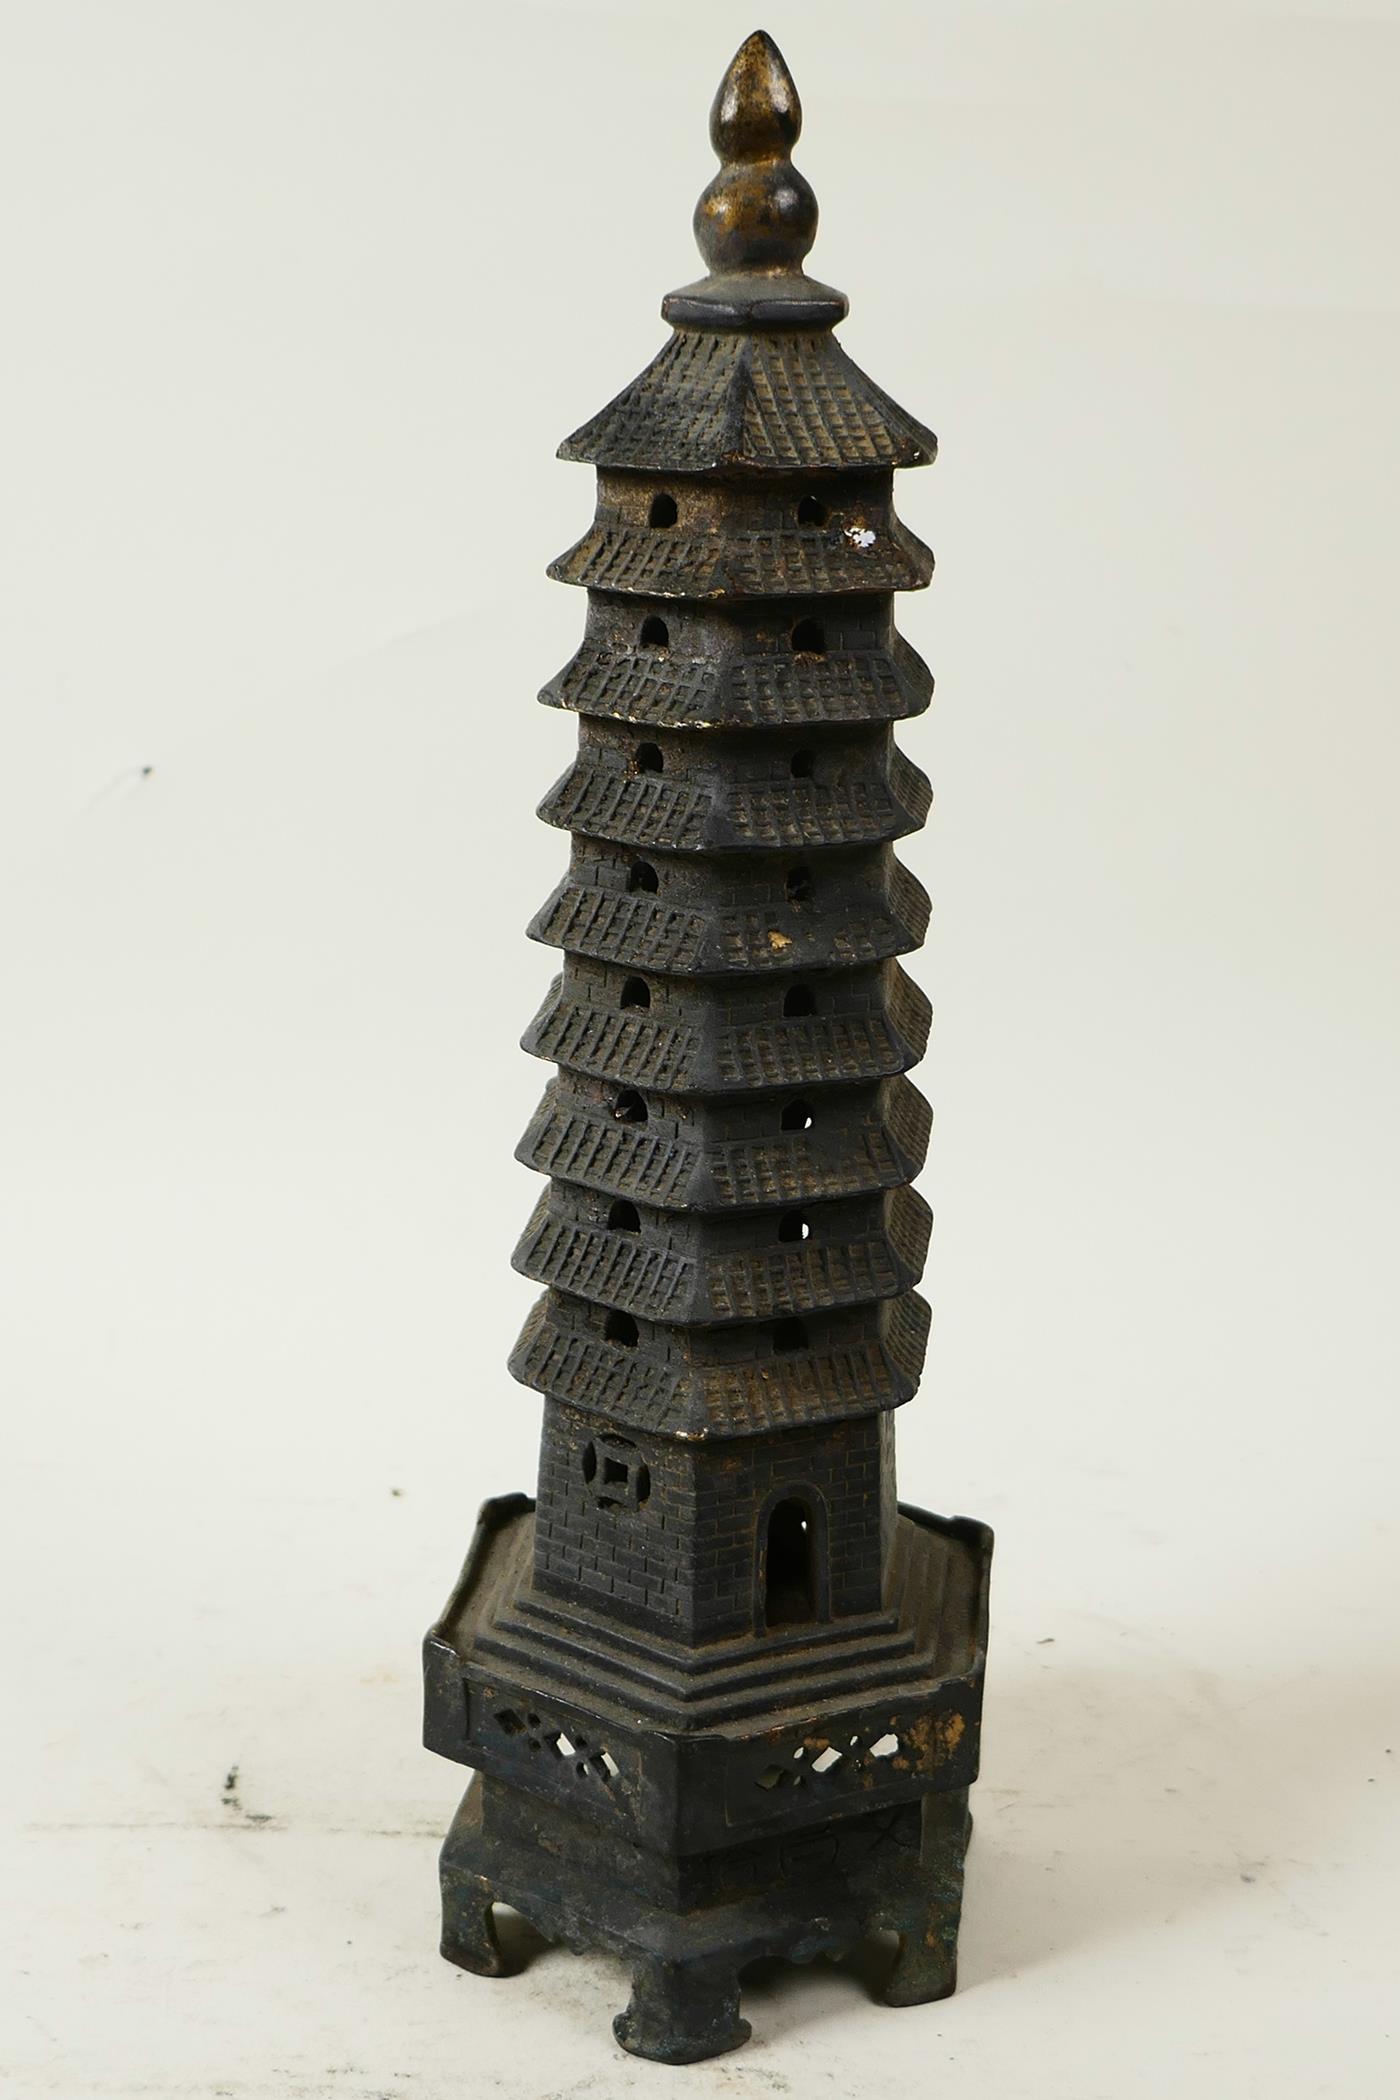 A Chinese bronze model of a tall pagoda, 11¾" high - Image 2 of 3